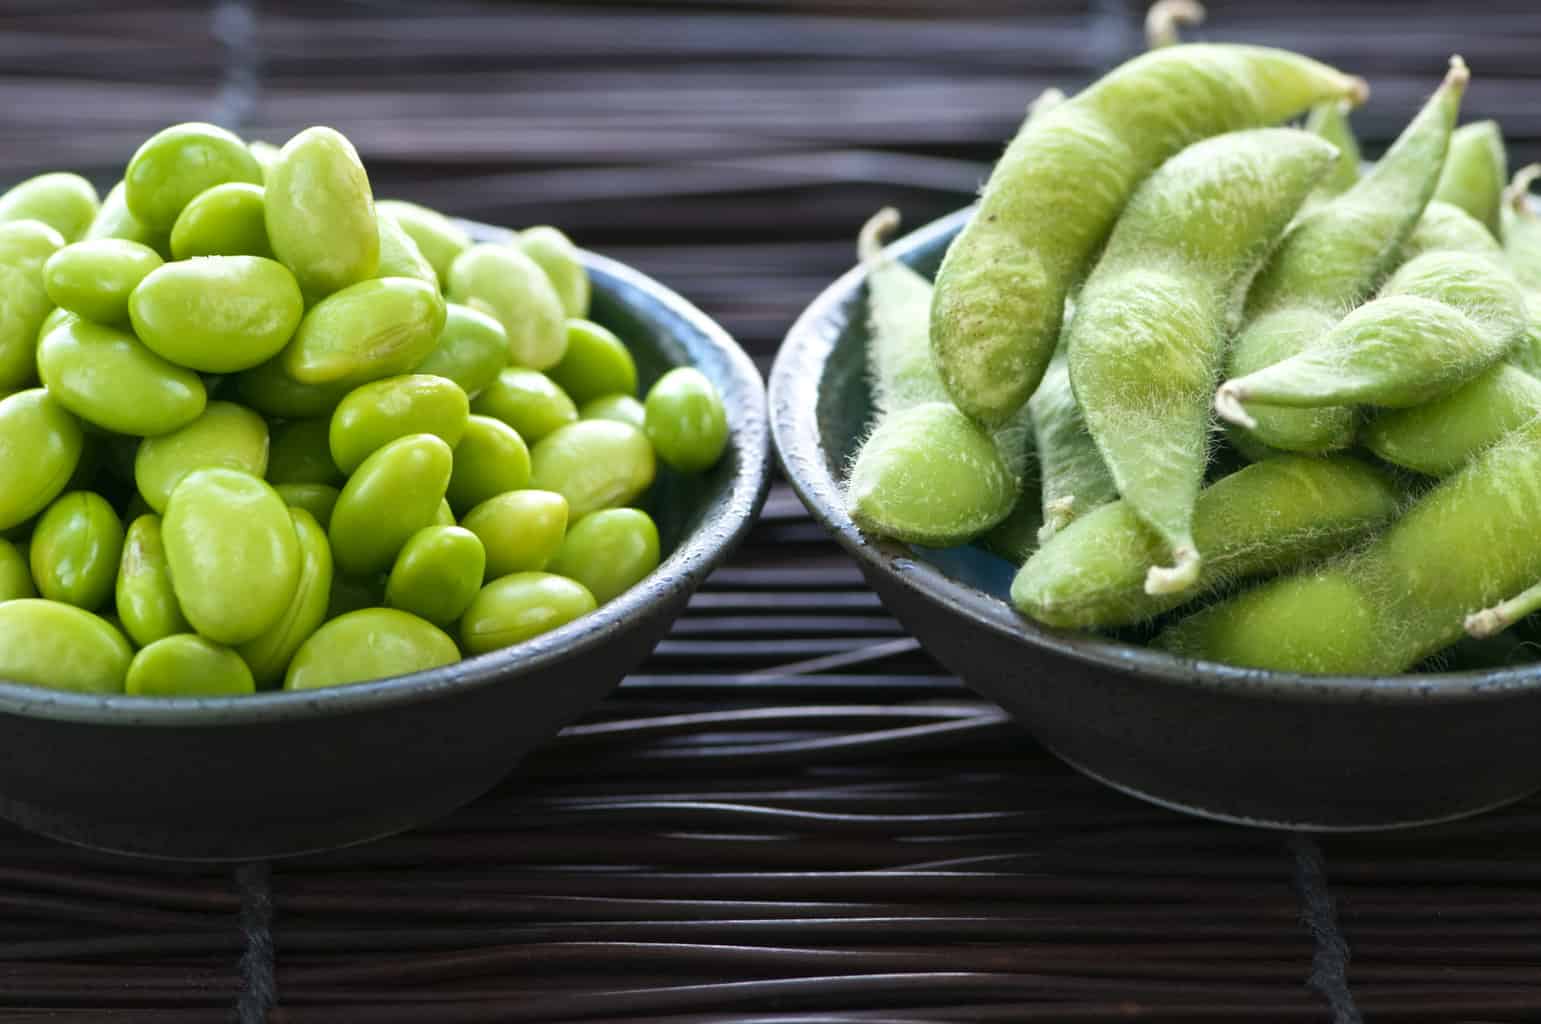 Edamame shelled and with pods in bowls